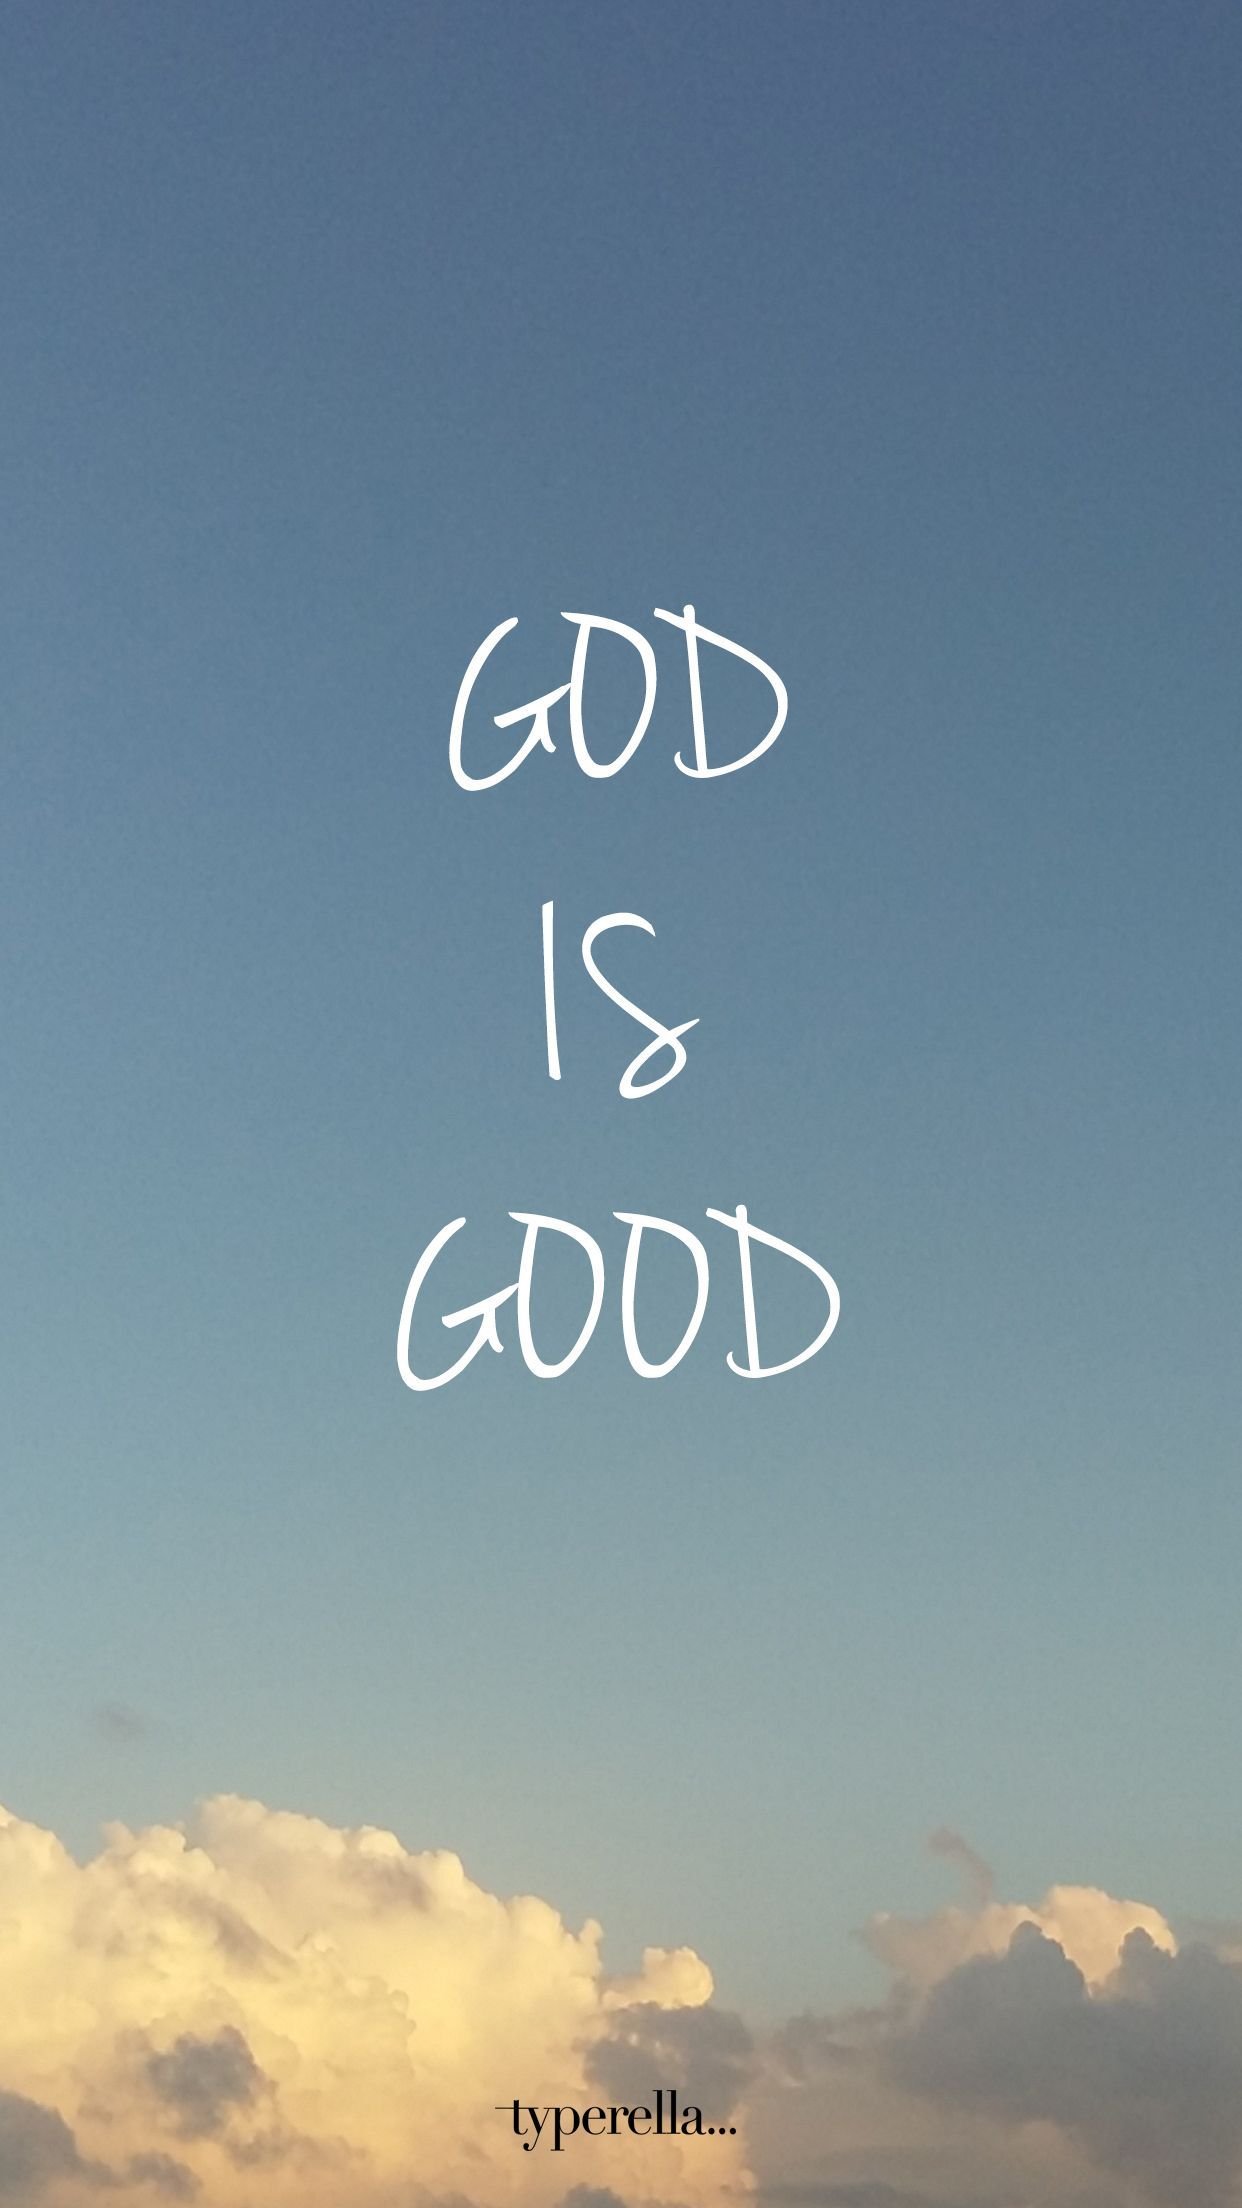 Good God Quotes Images Free Download | HD Wallpapers